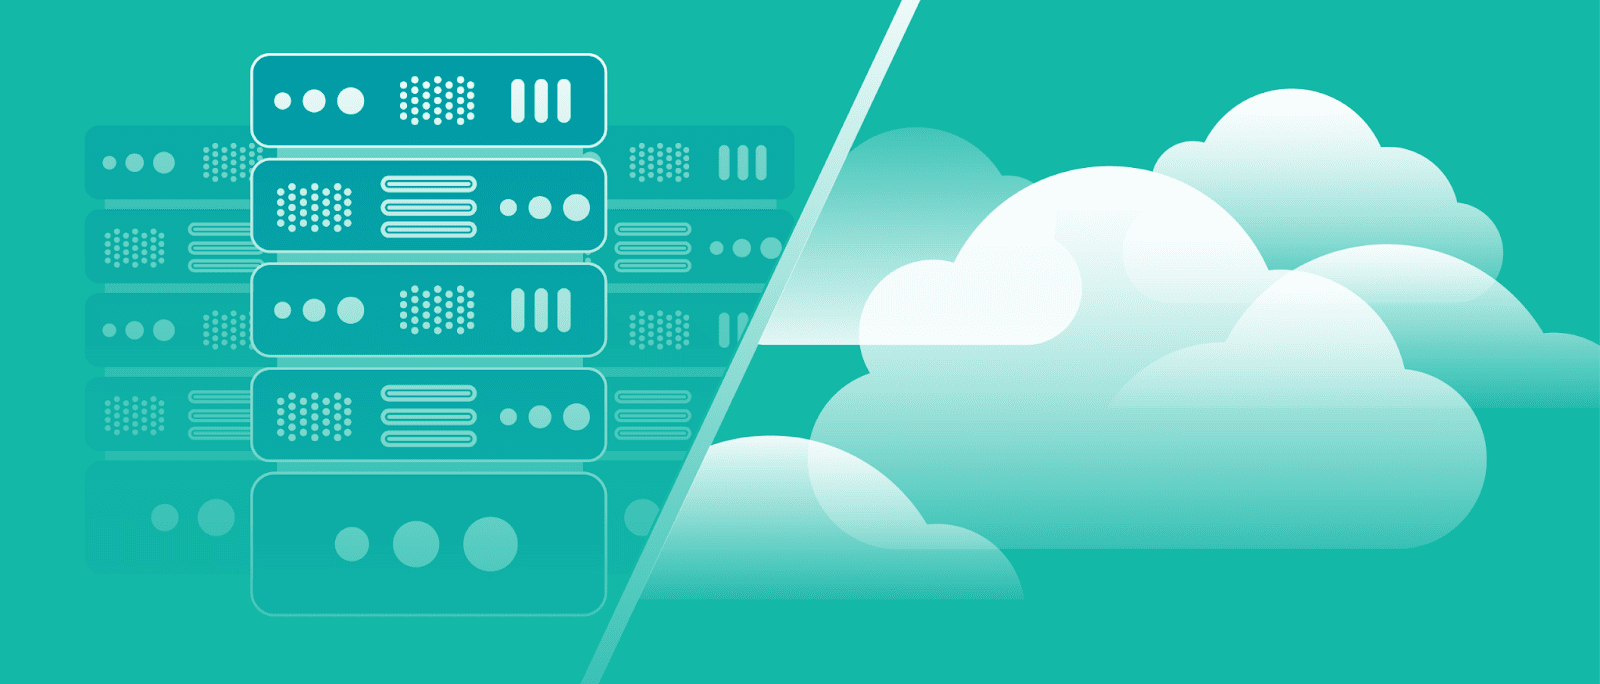 illustration of a split screen of servers on the left and clouds on the right